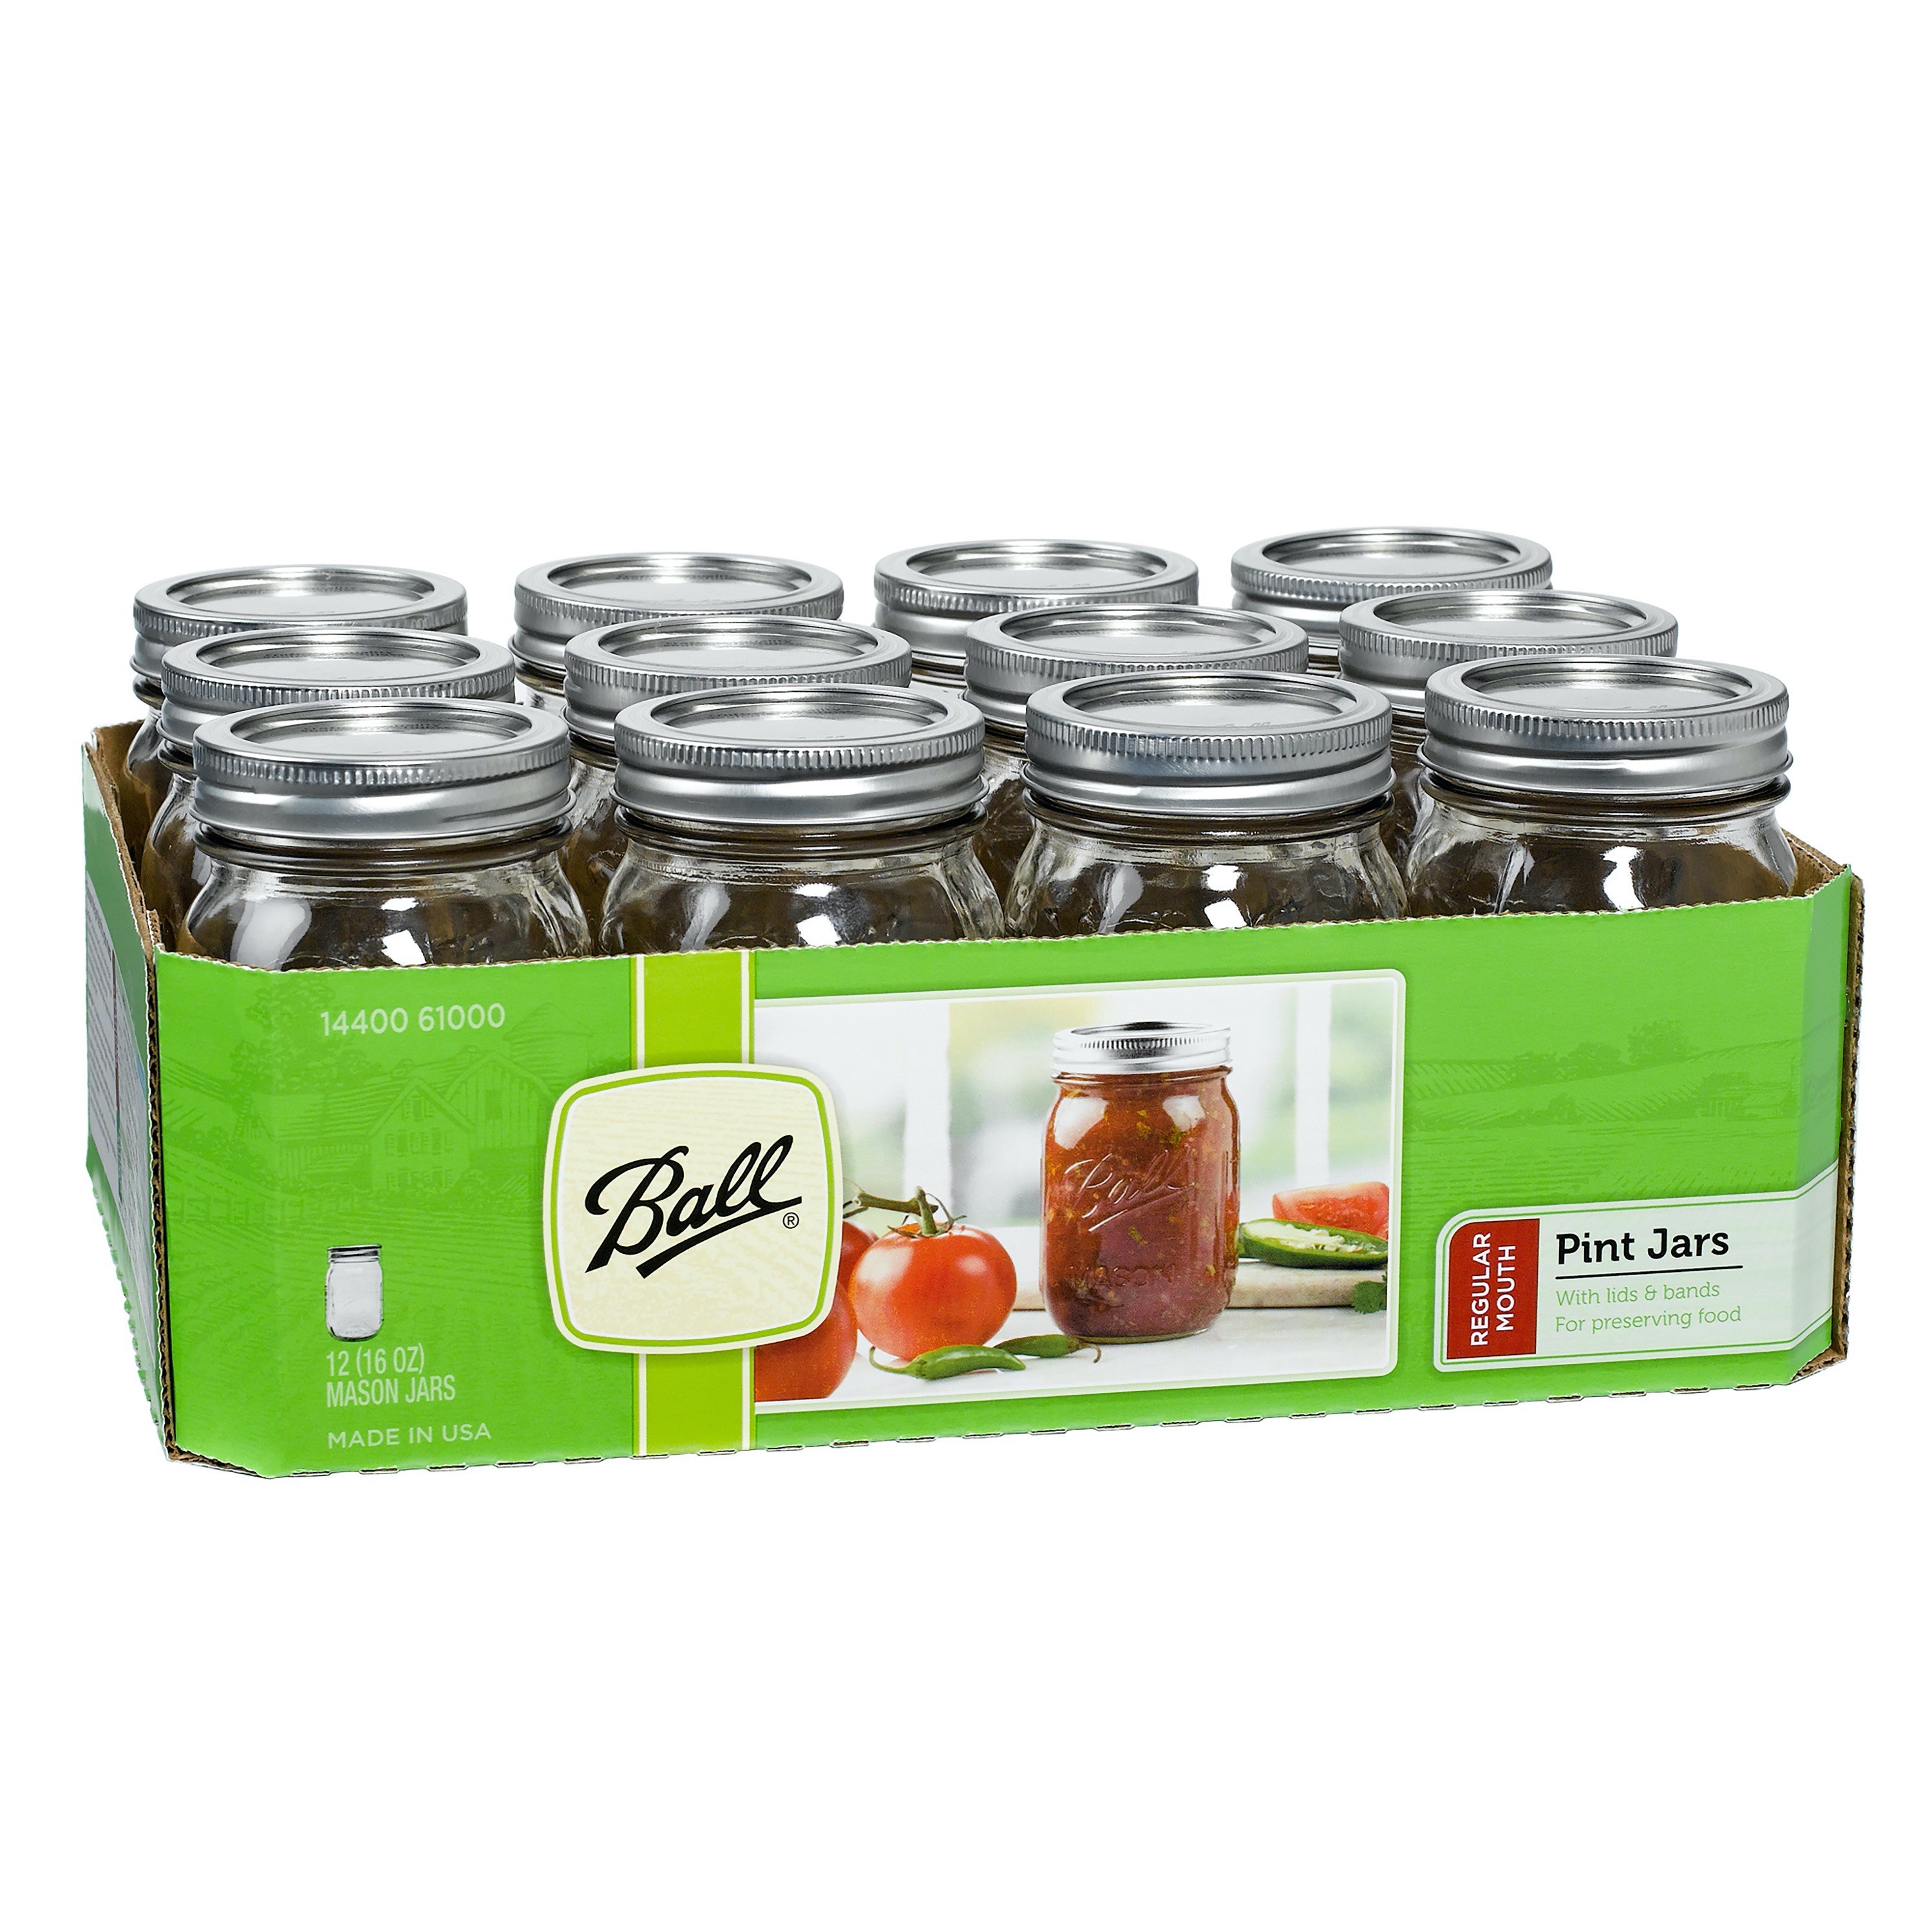 Ball Regular Mouth 16oz Pint Mason Jars with Lids & Bands, 12 Count - image 1 of 4